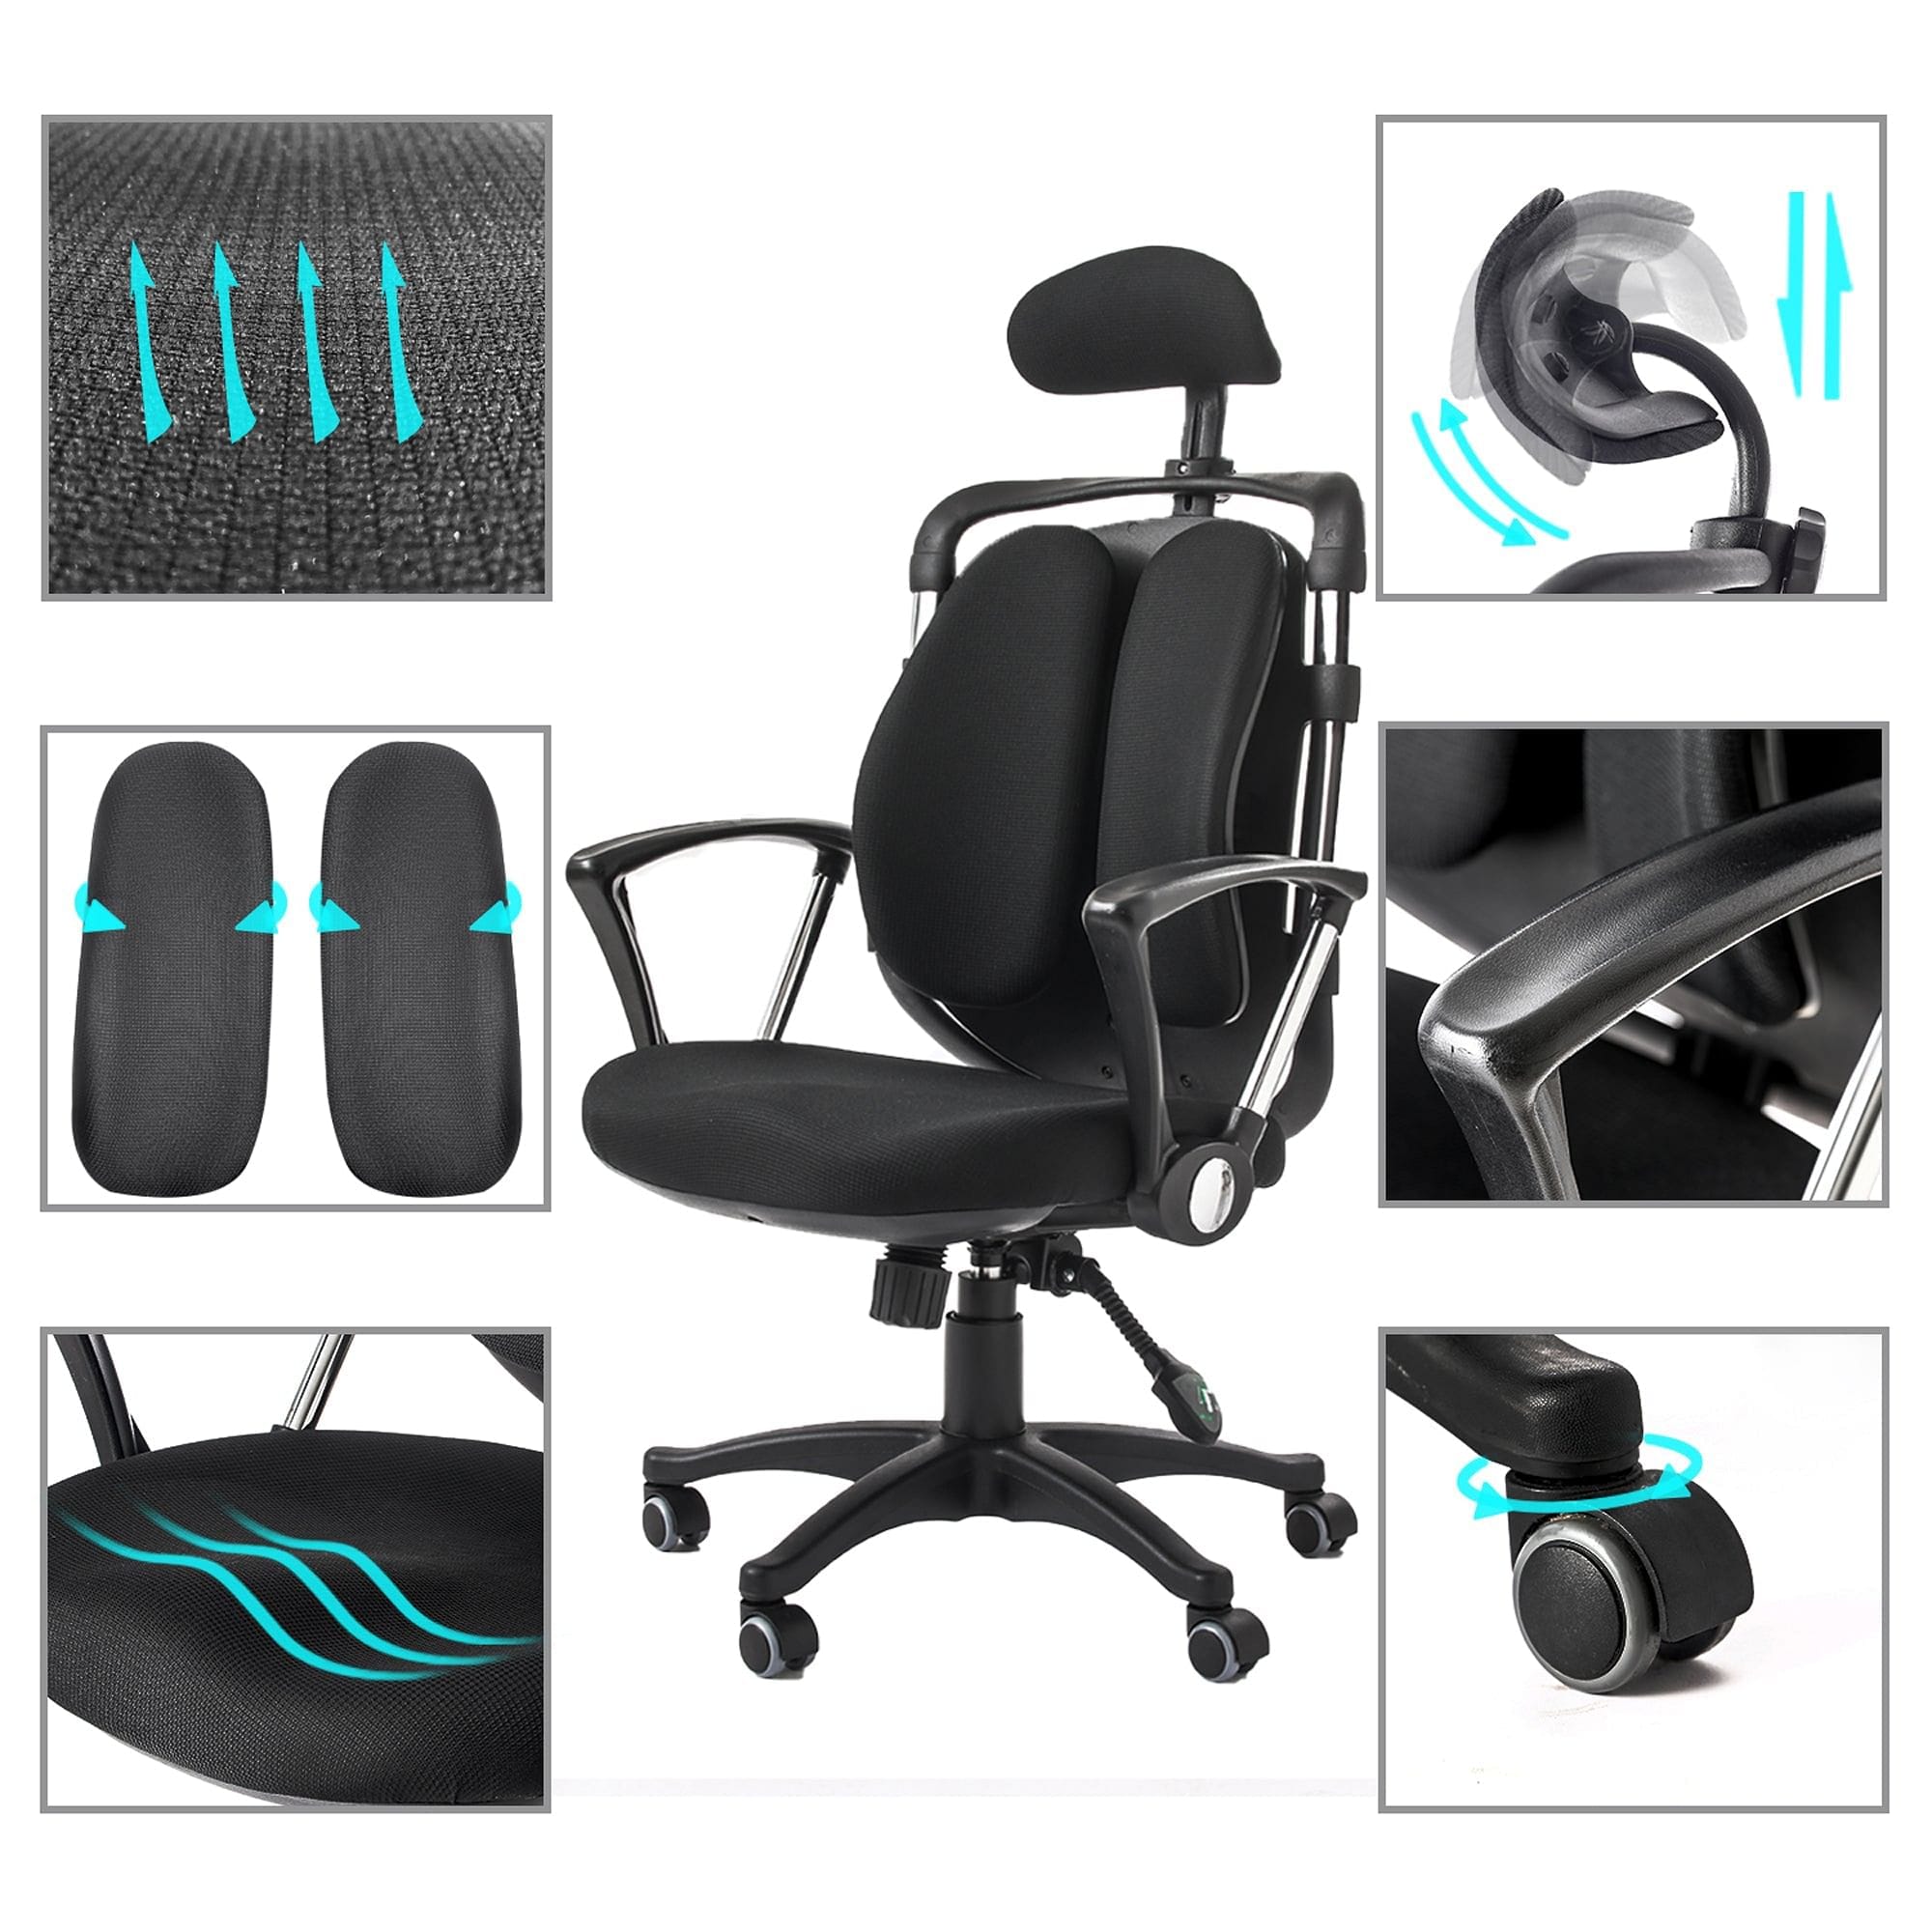 Ergonomic Office Chair Desk Computer High Back Swivel Chair Managerial Executive Chair with Adjustable Headrest & Back Support